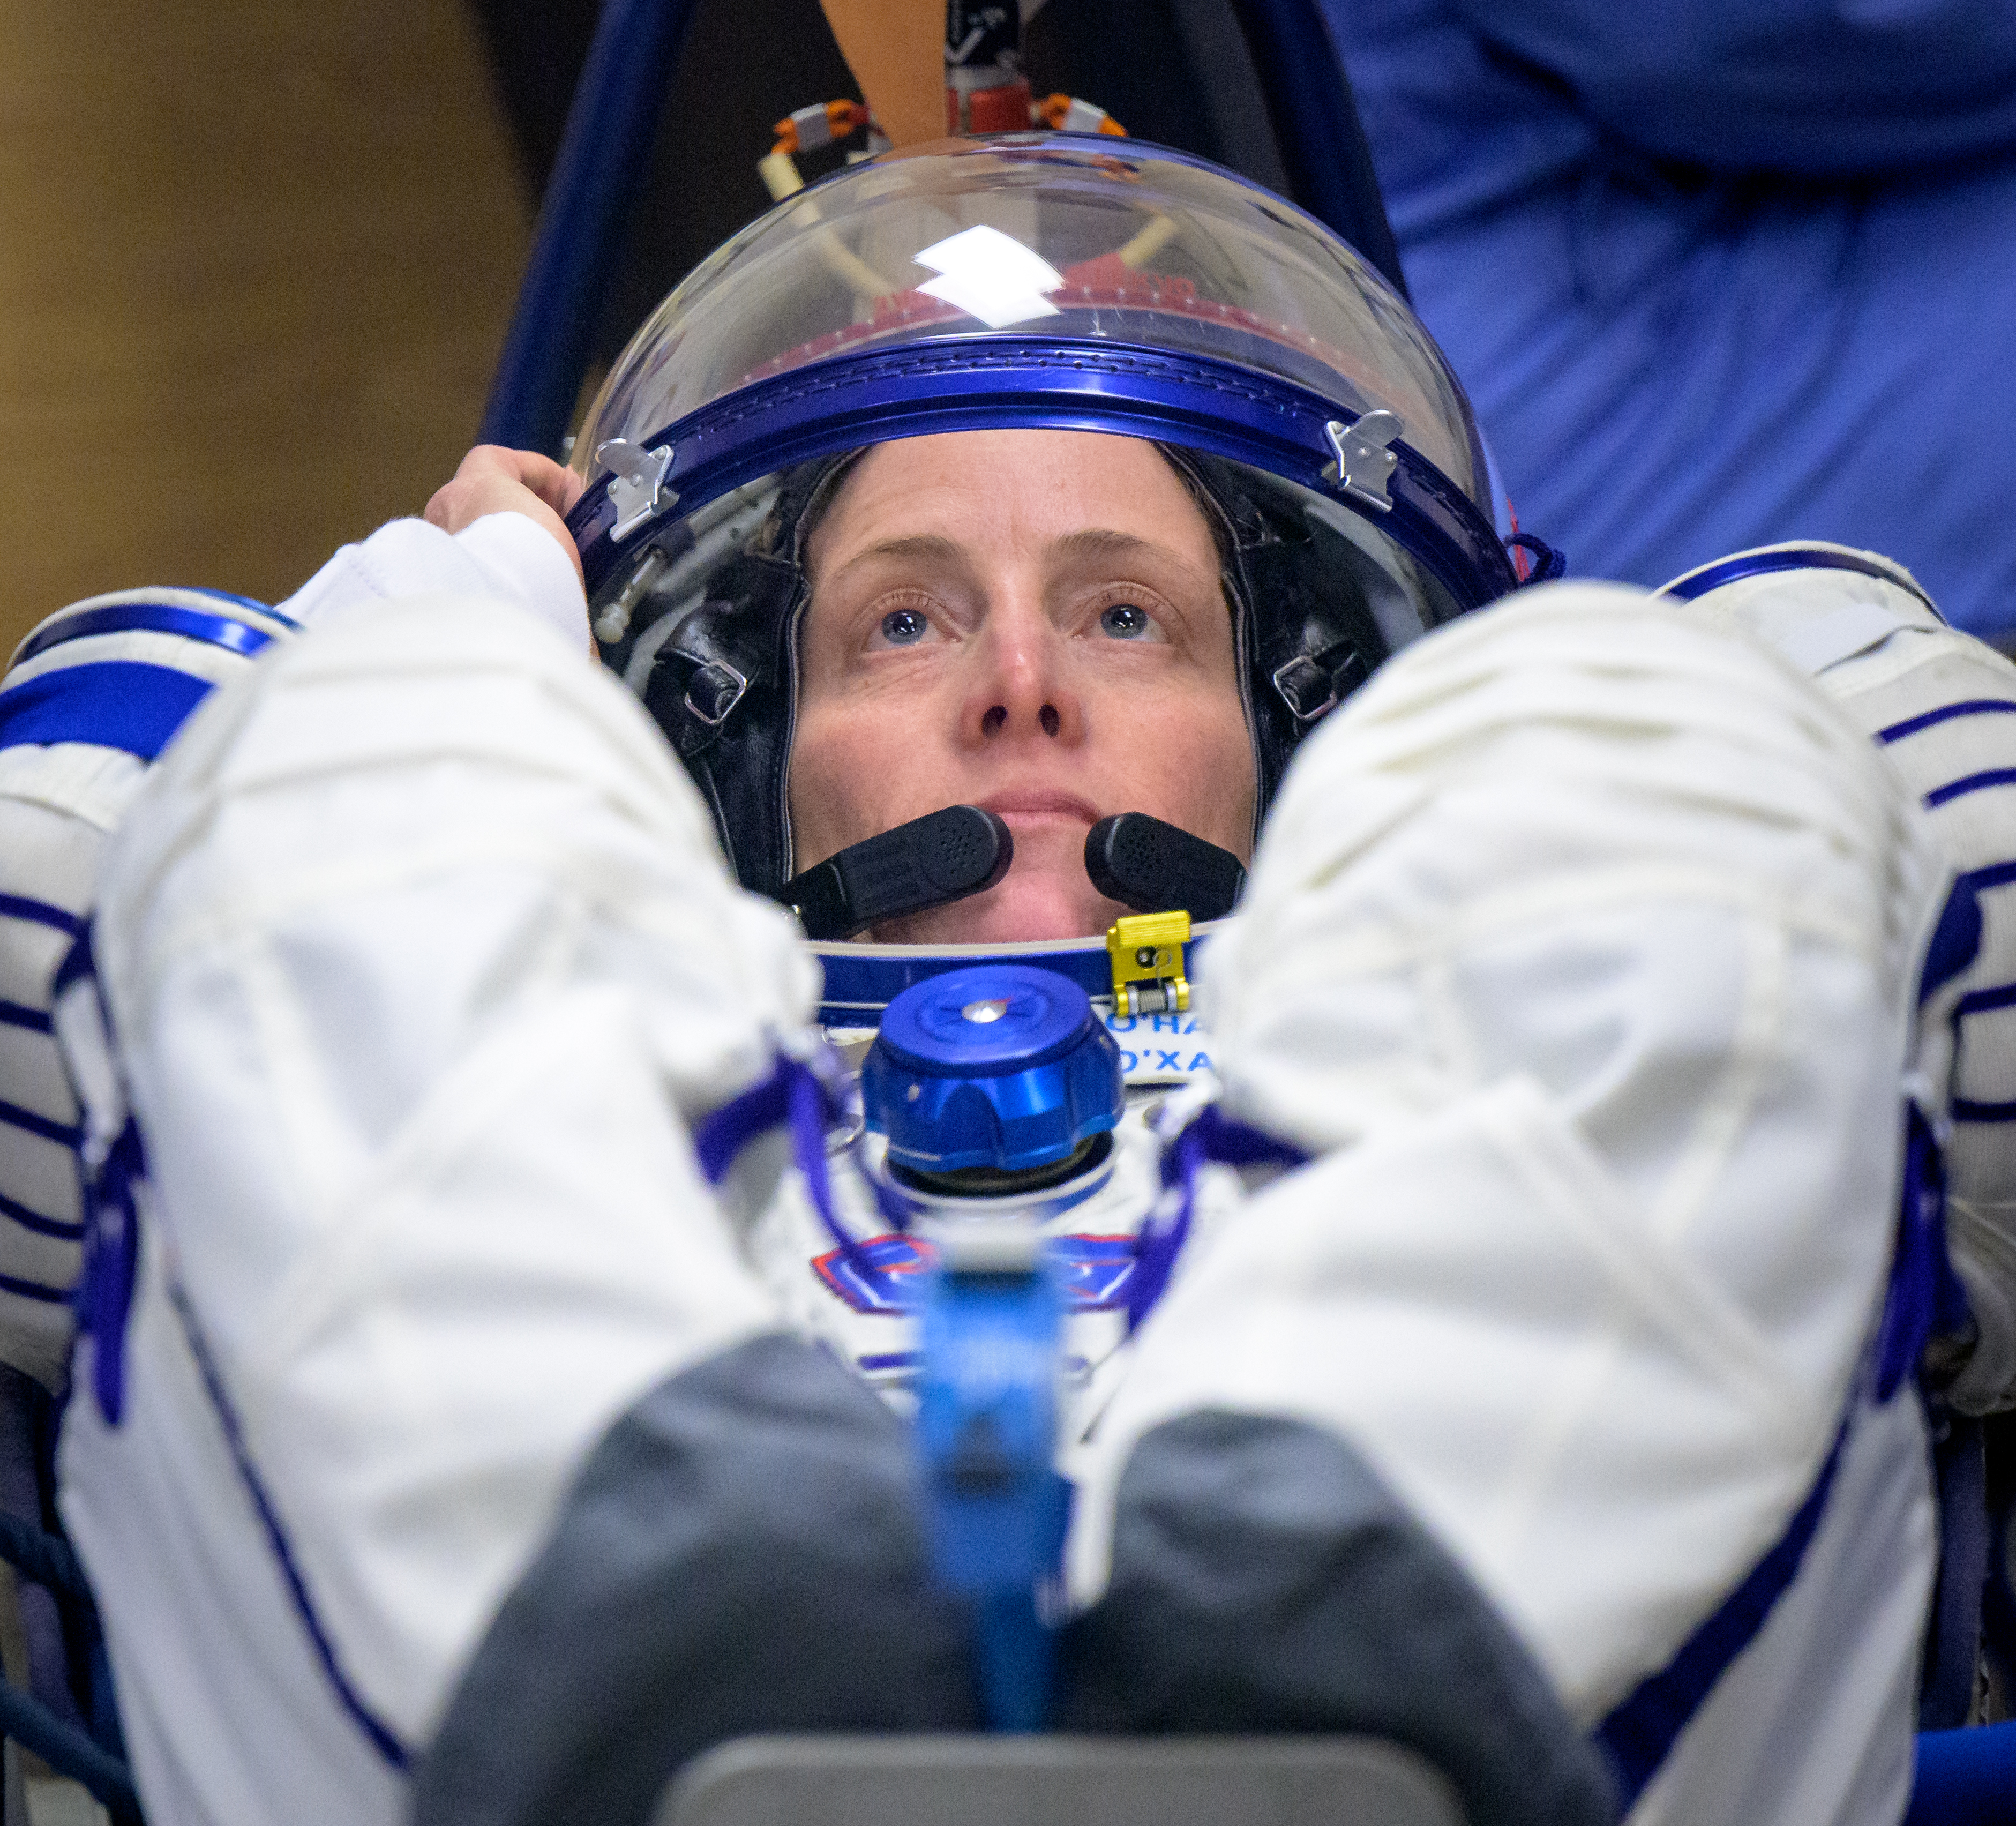 Astronaut Loral O'Hara looks upward while in a reclined position. Her feet are out of focus in the foreground. Her hand rests on the blue rim of her helmet. She wears a white and blue spacesuit.